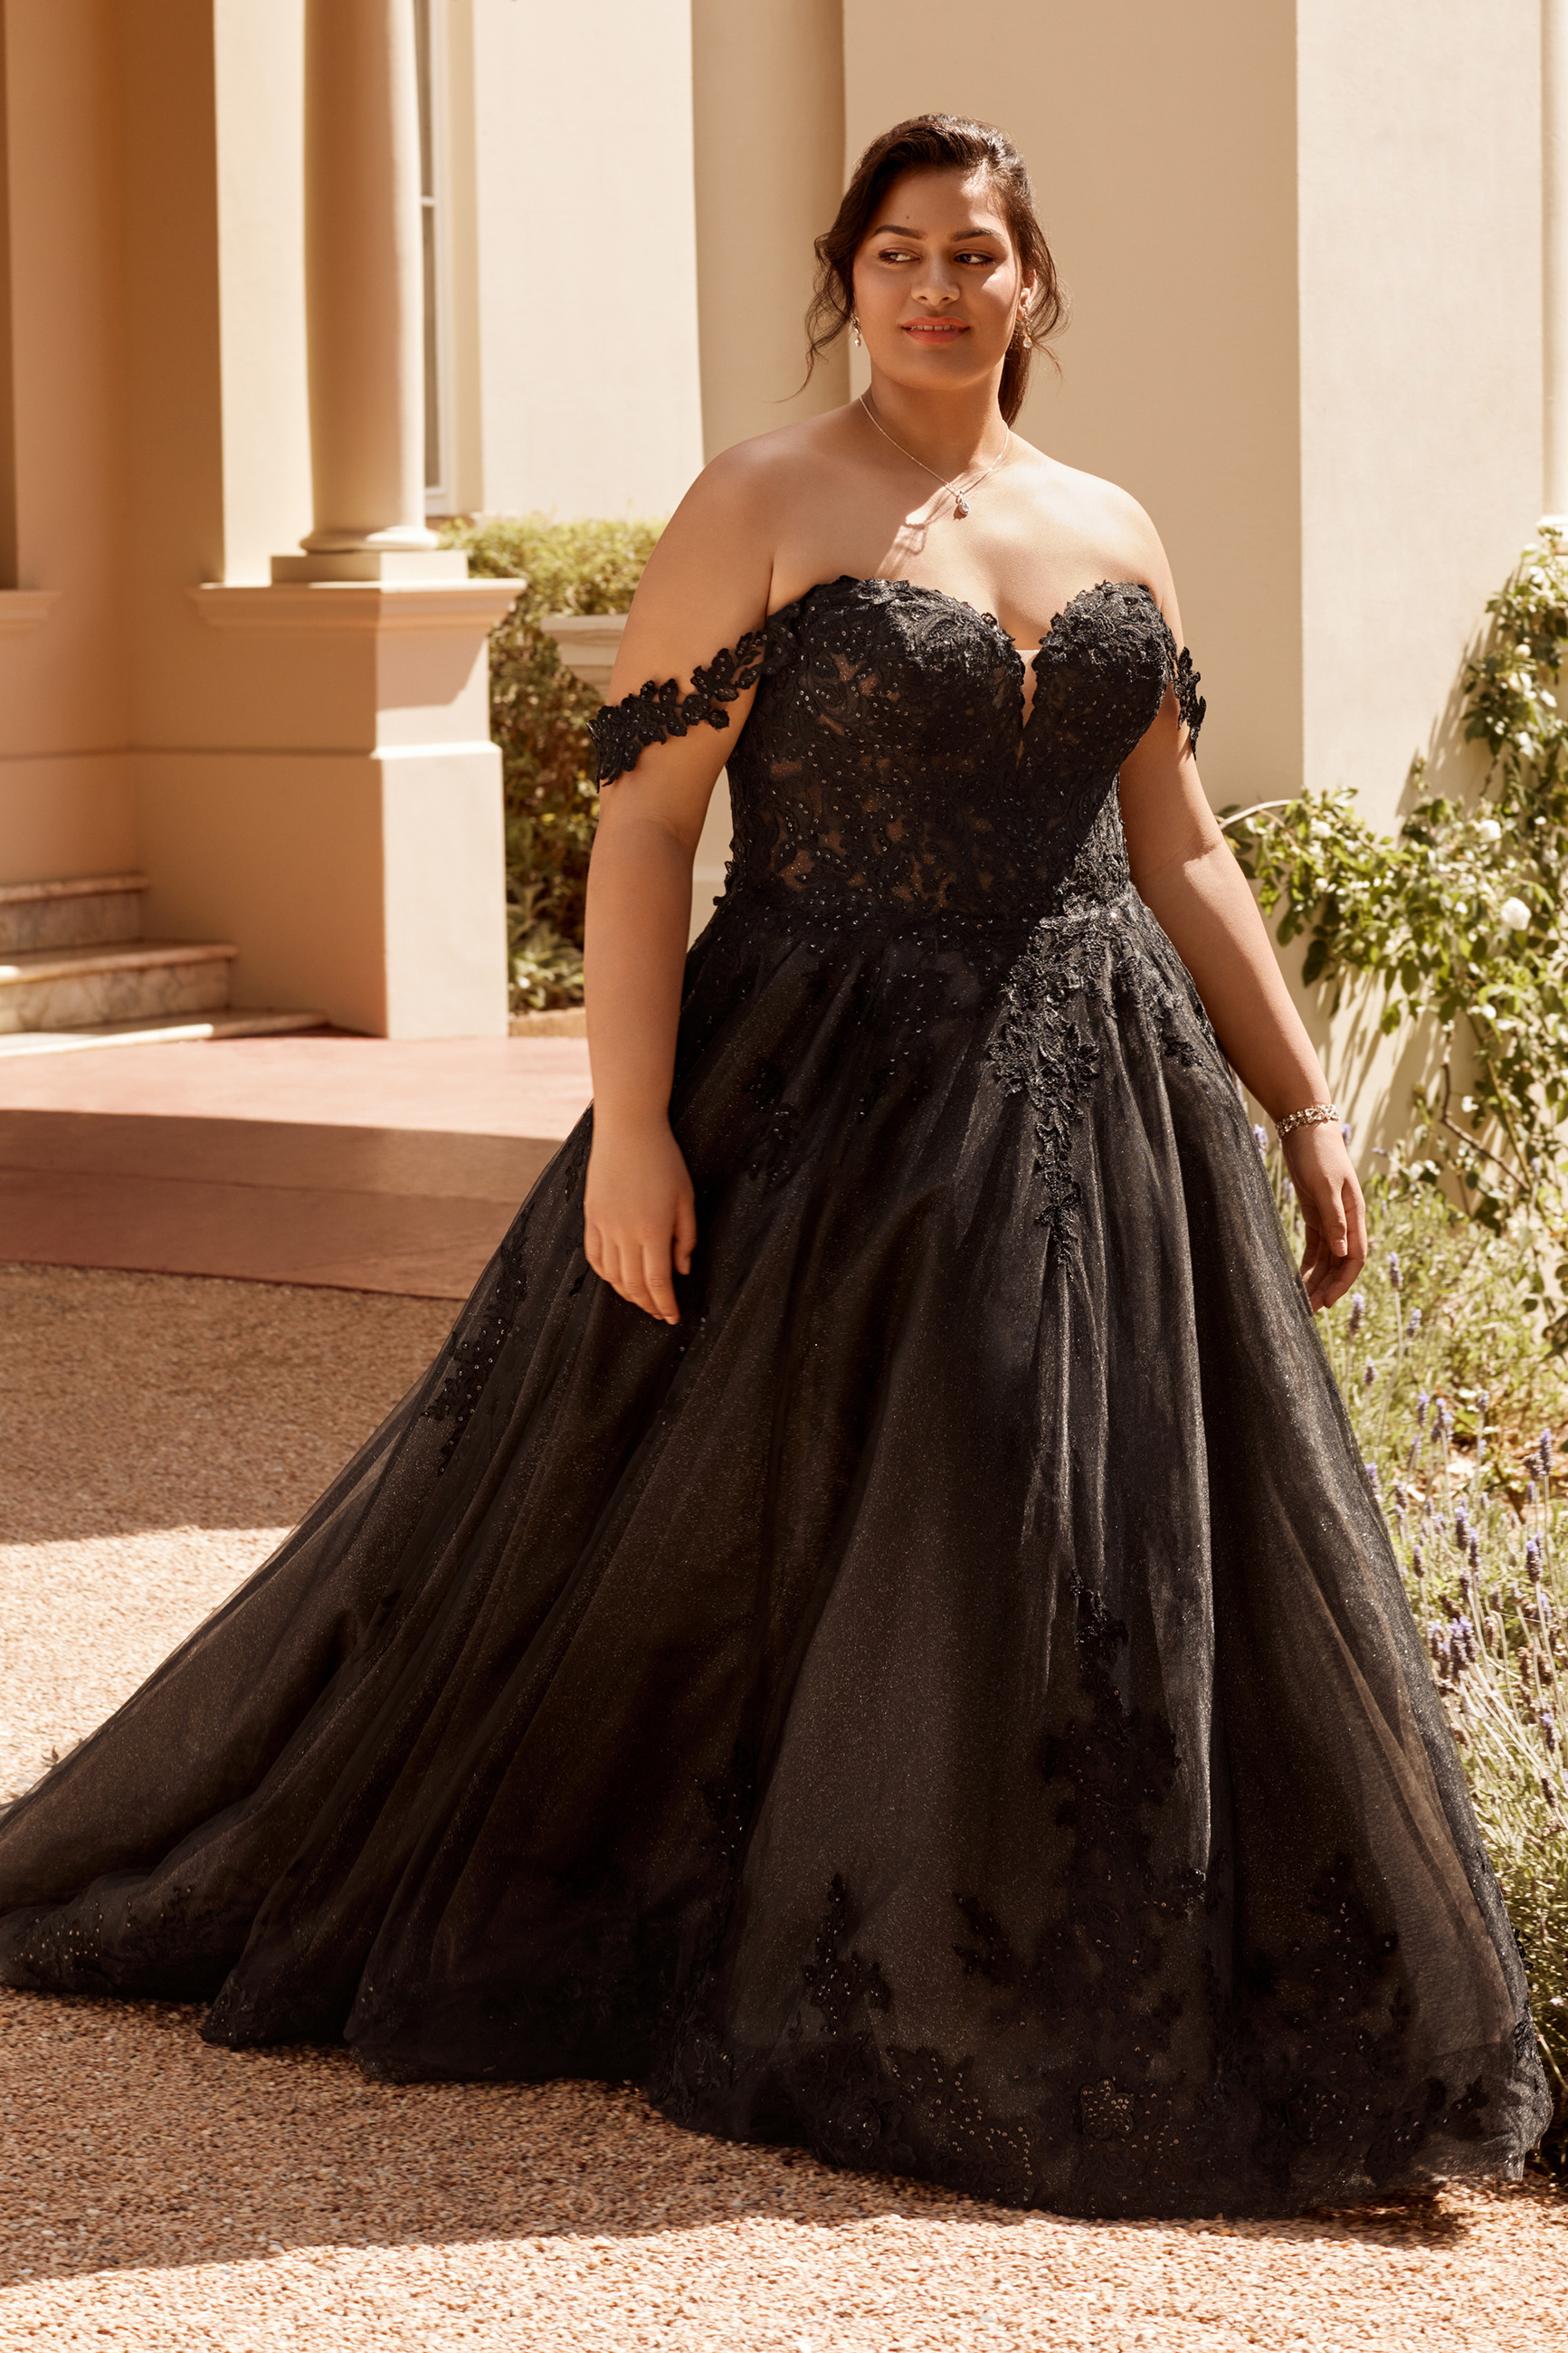 23022+Veil Black Wedding Dress with Back Corset Dresses with Lace with  Sequins Bridal Gown of Mermaid Dress with Pakistan Style Plus Size Dress  Hot Sale - China Wedding Dress and Bridal Wedding